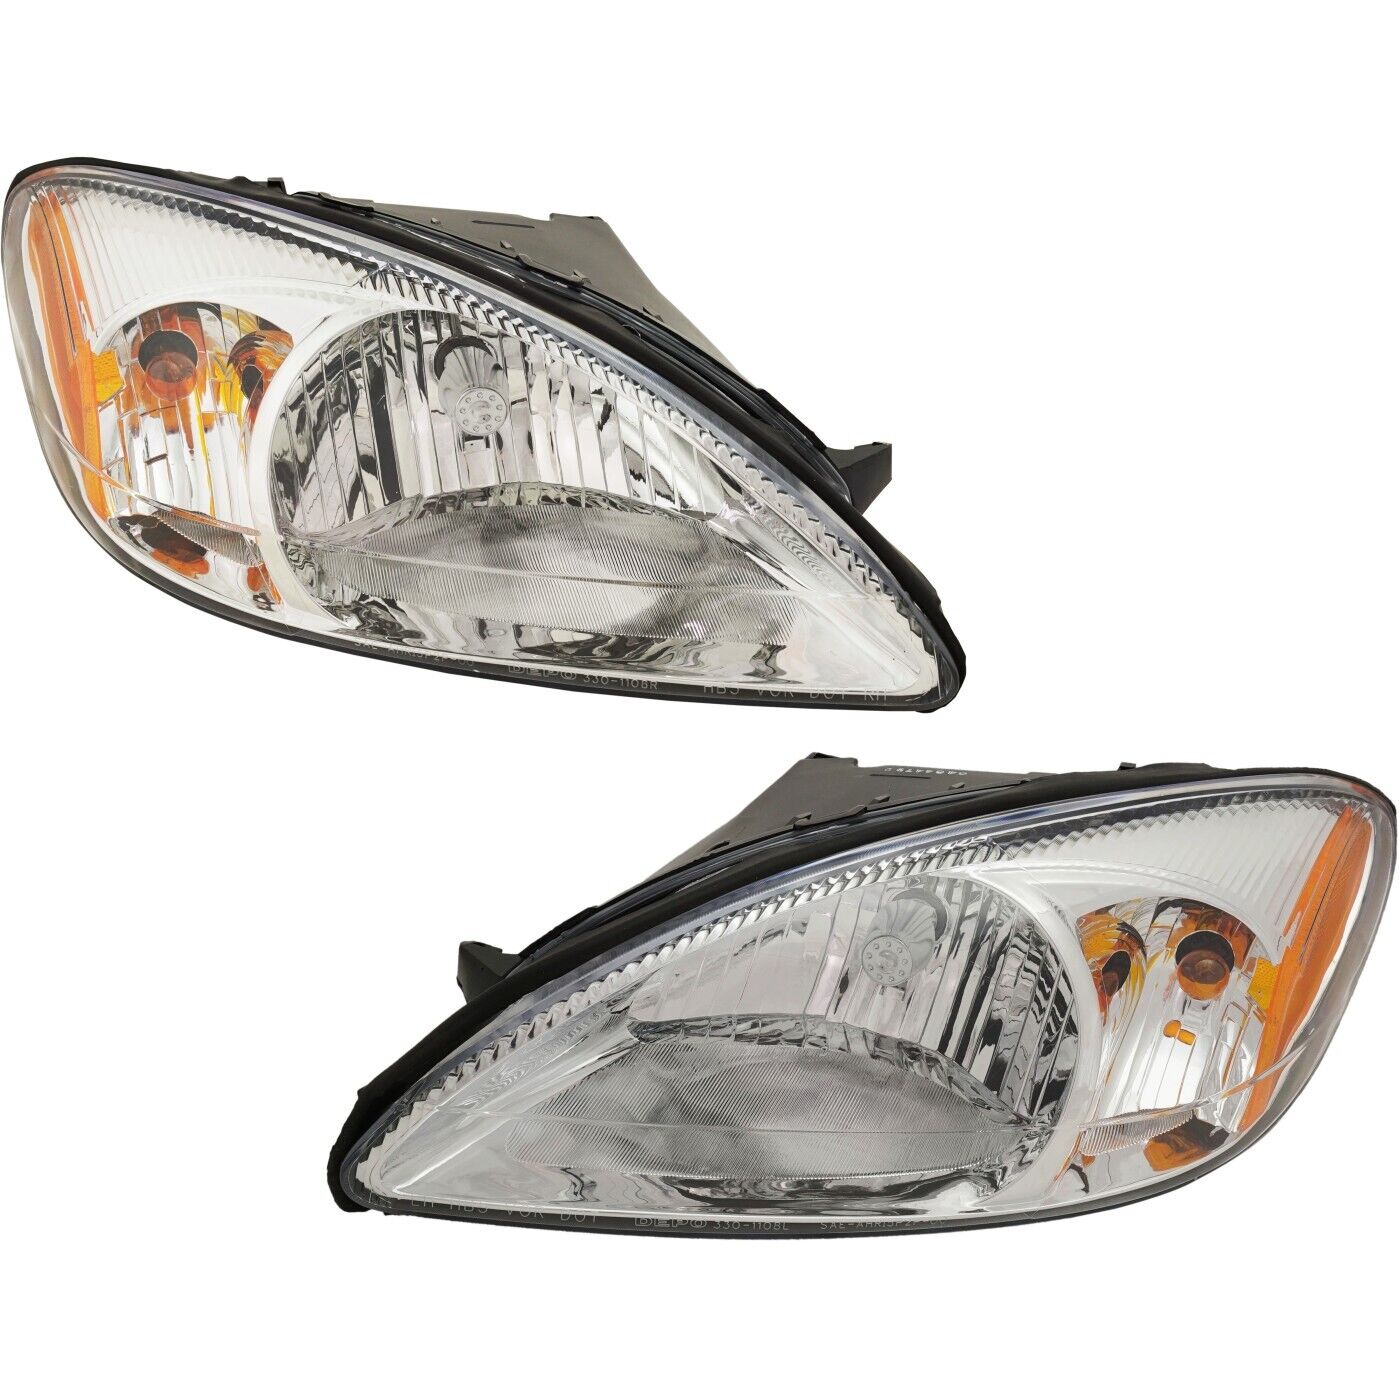 Headlight Set For 2000-2007 Ford Taurus Left and Right Chrome Housing 2Pc